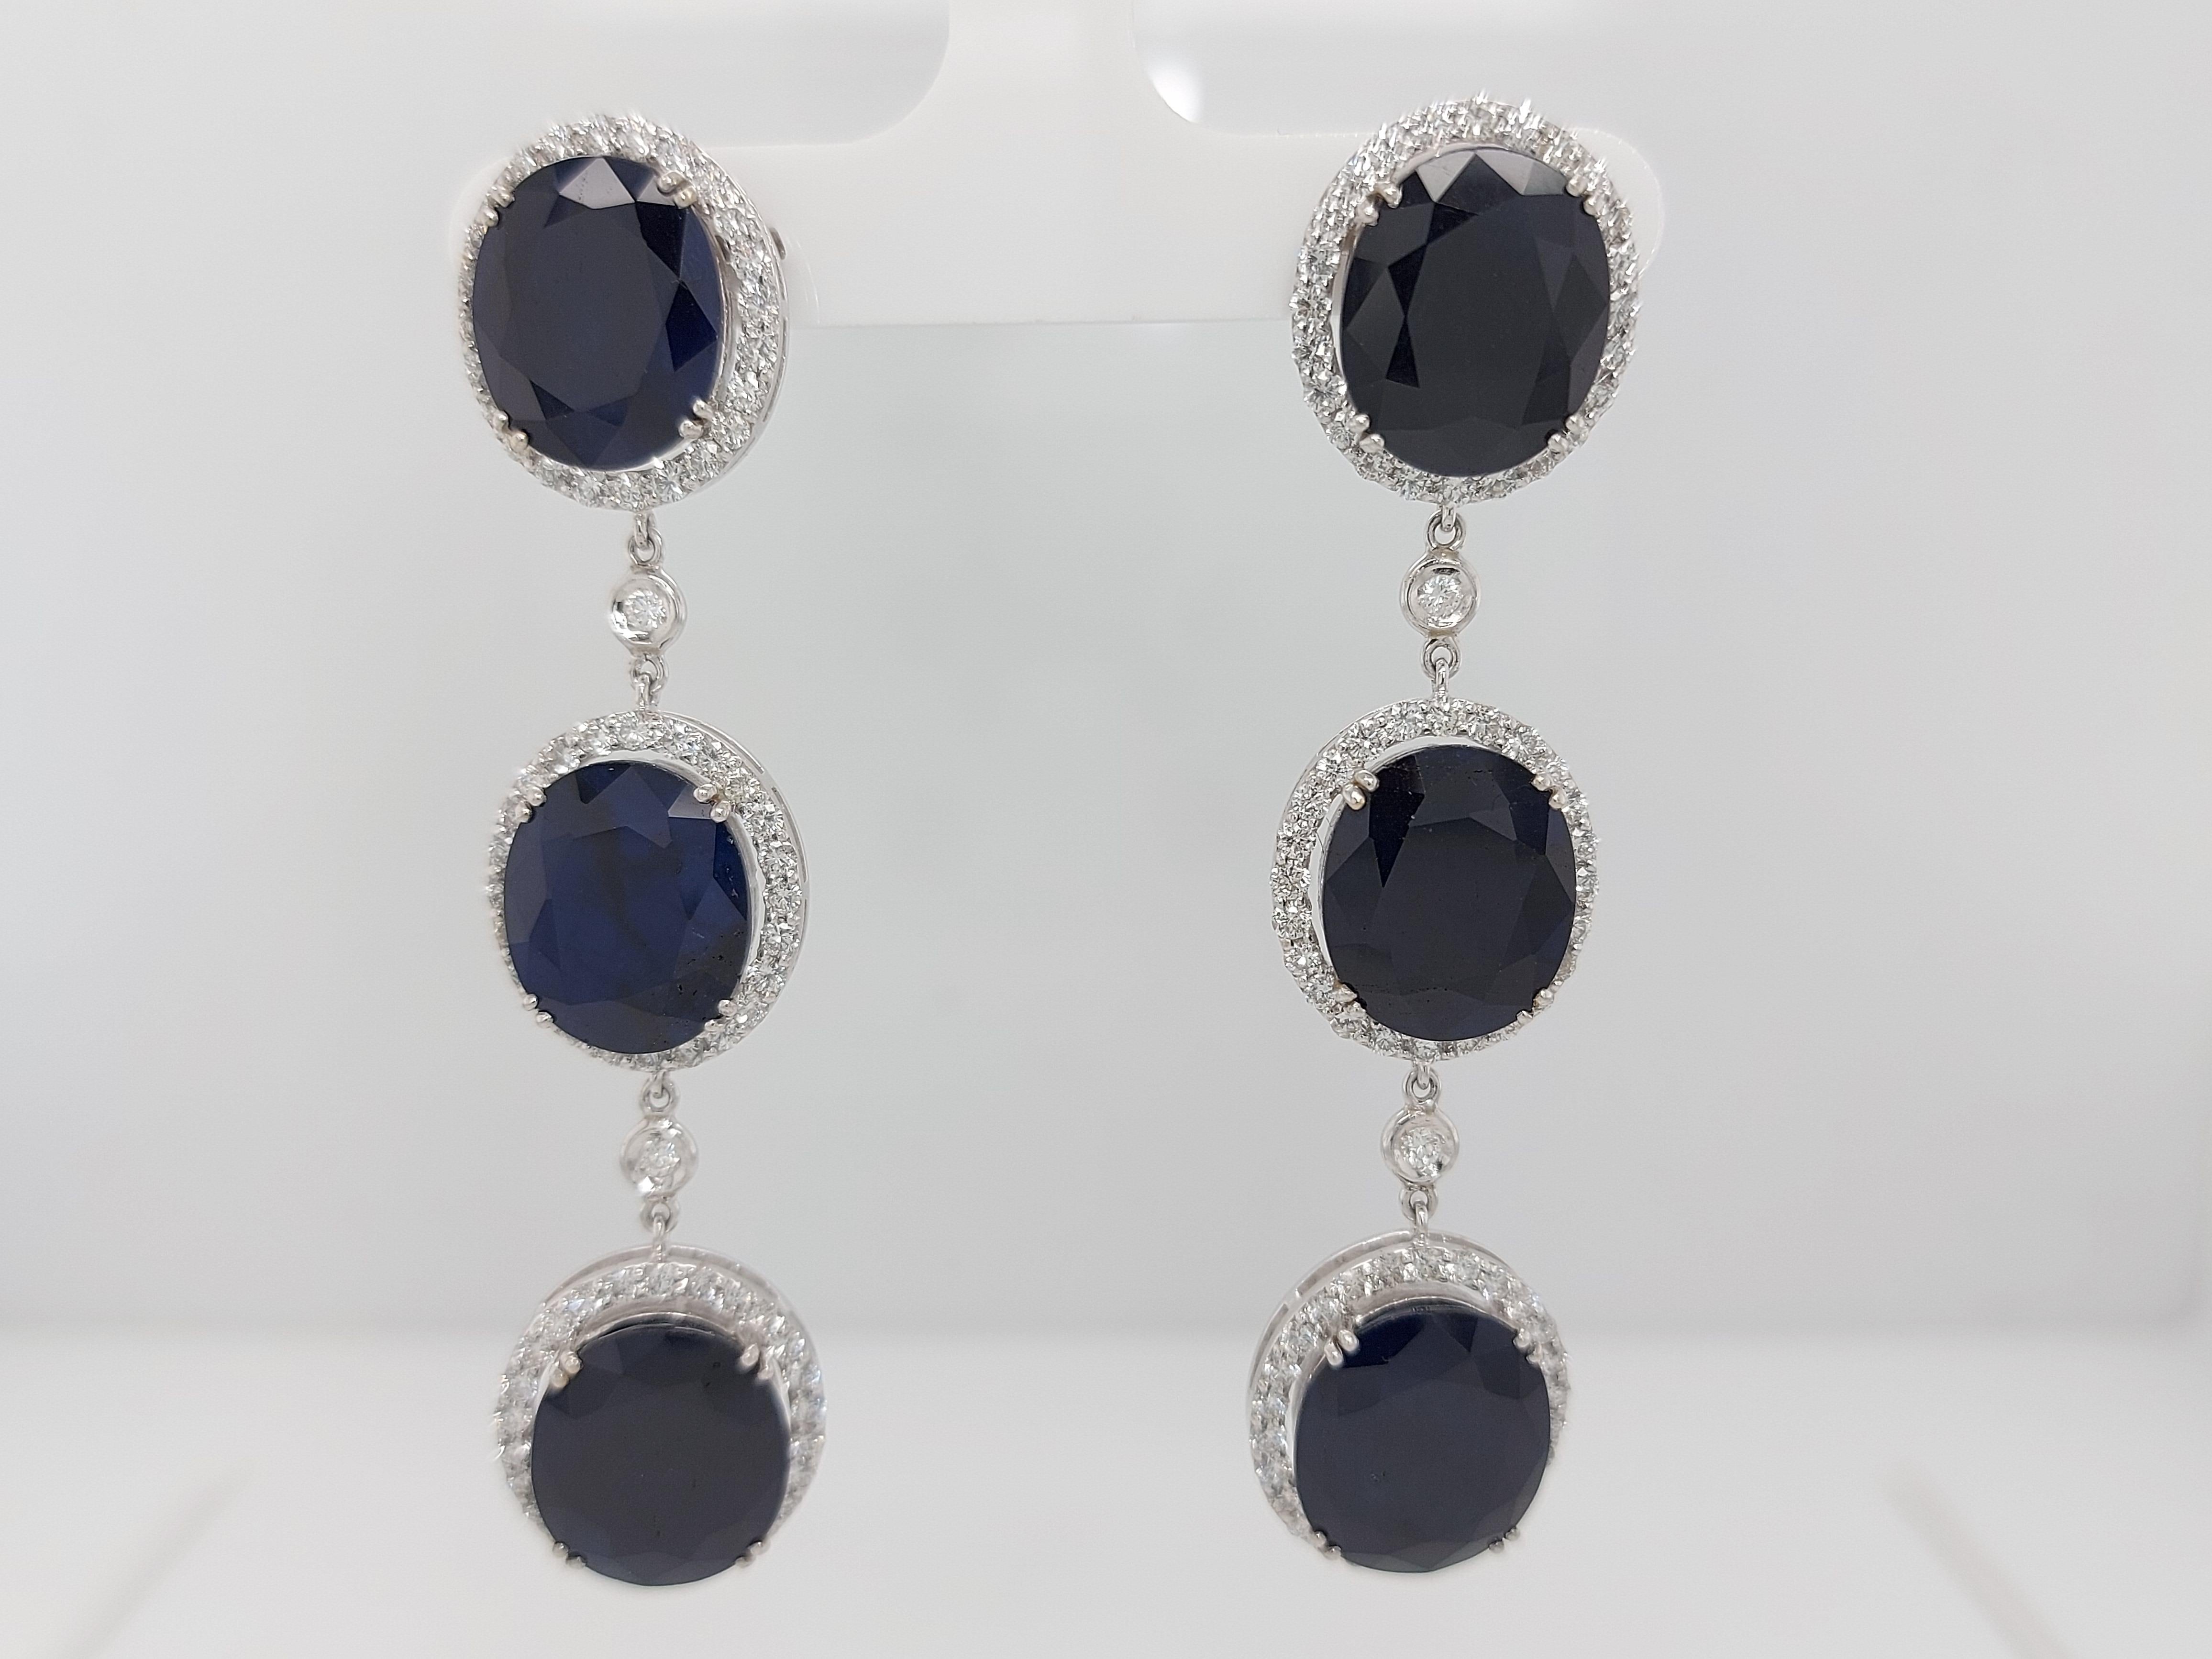 18kt White Gold Earrings 43.56ct Sapphire, 3.51ct Diamond For Sale 1